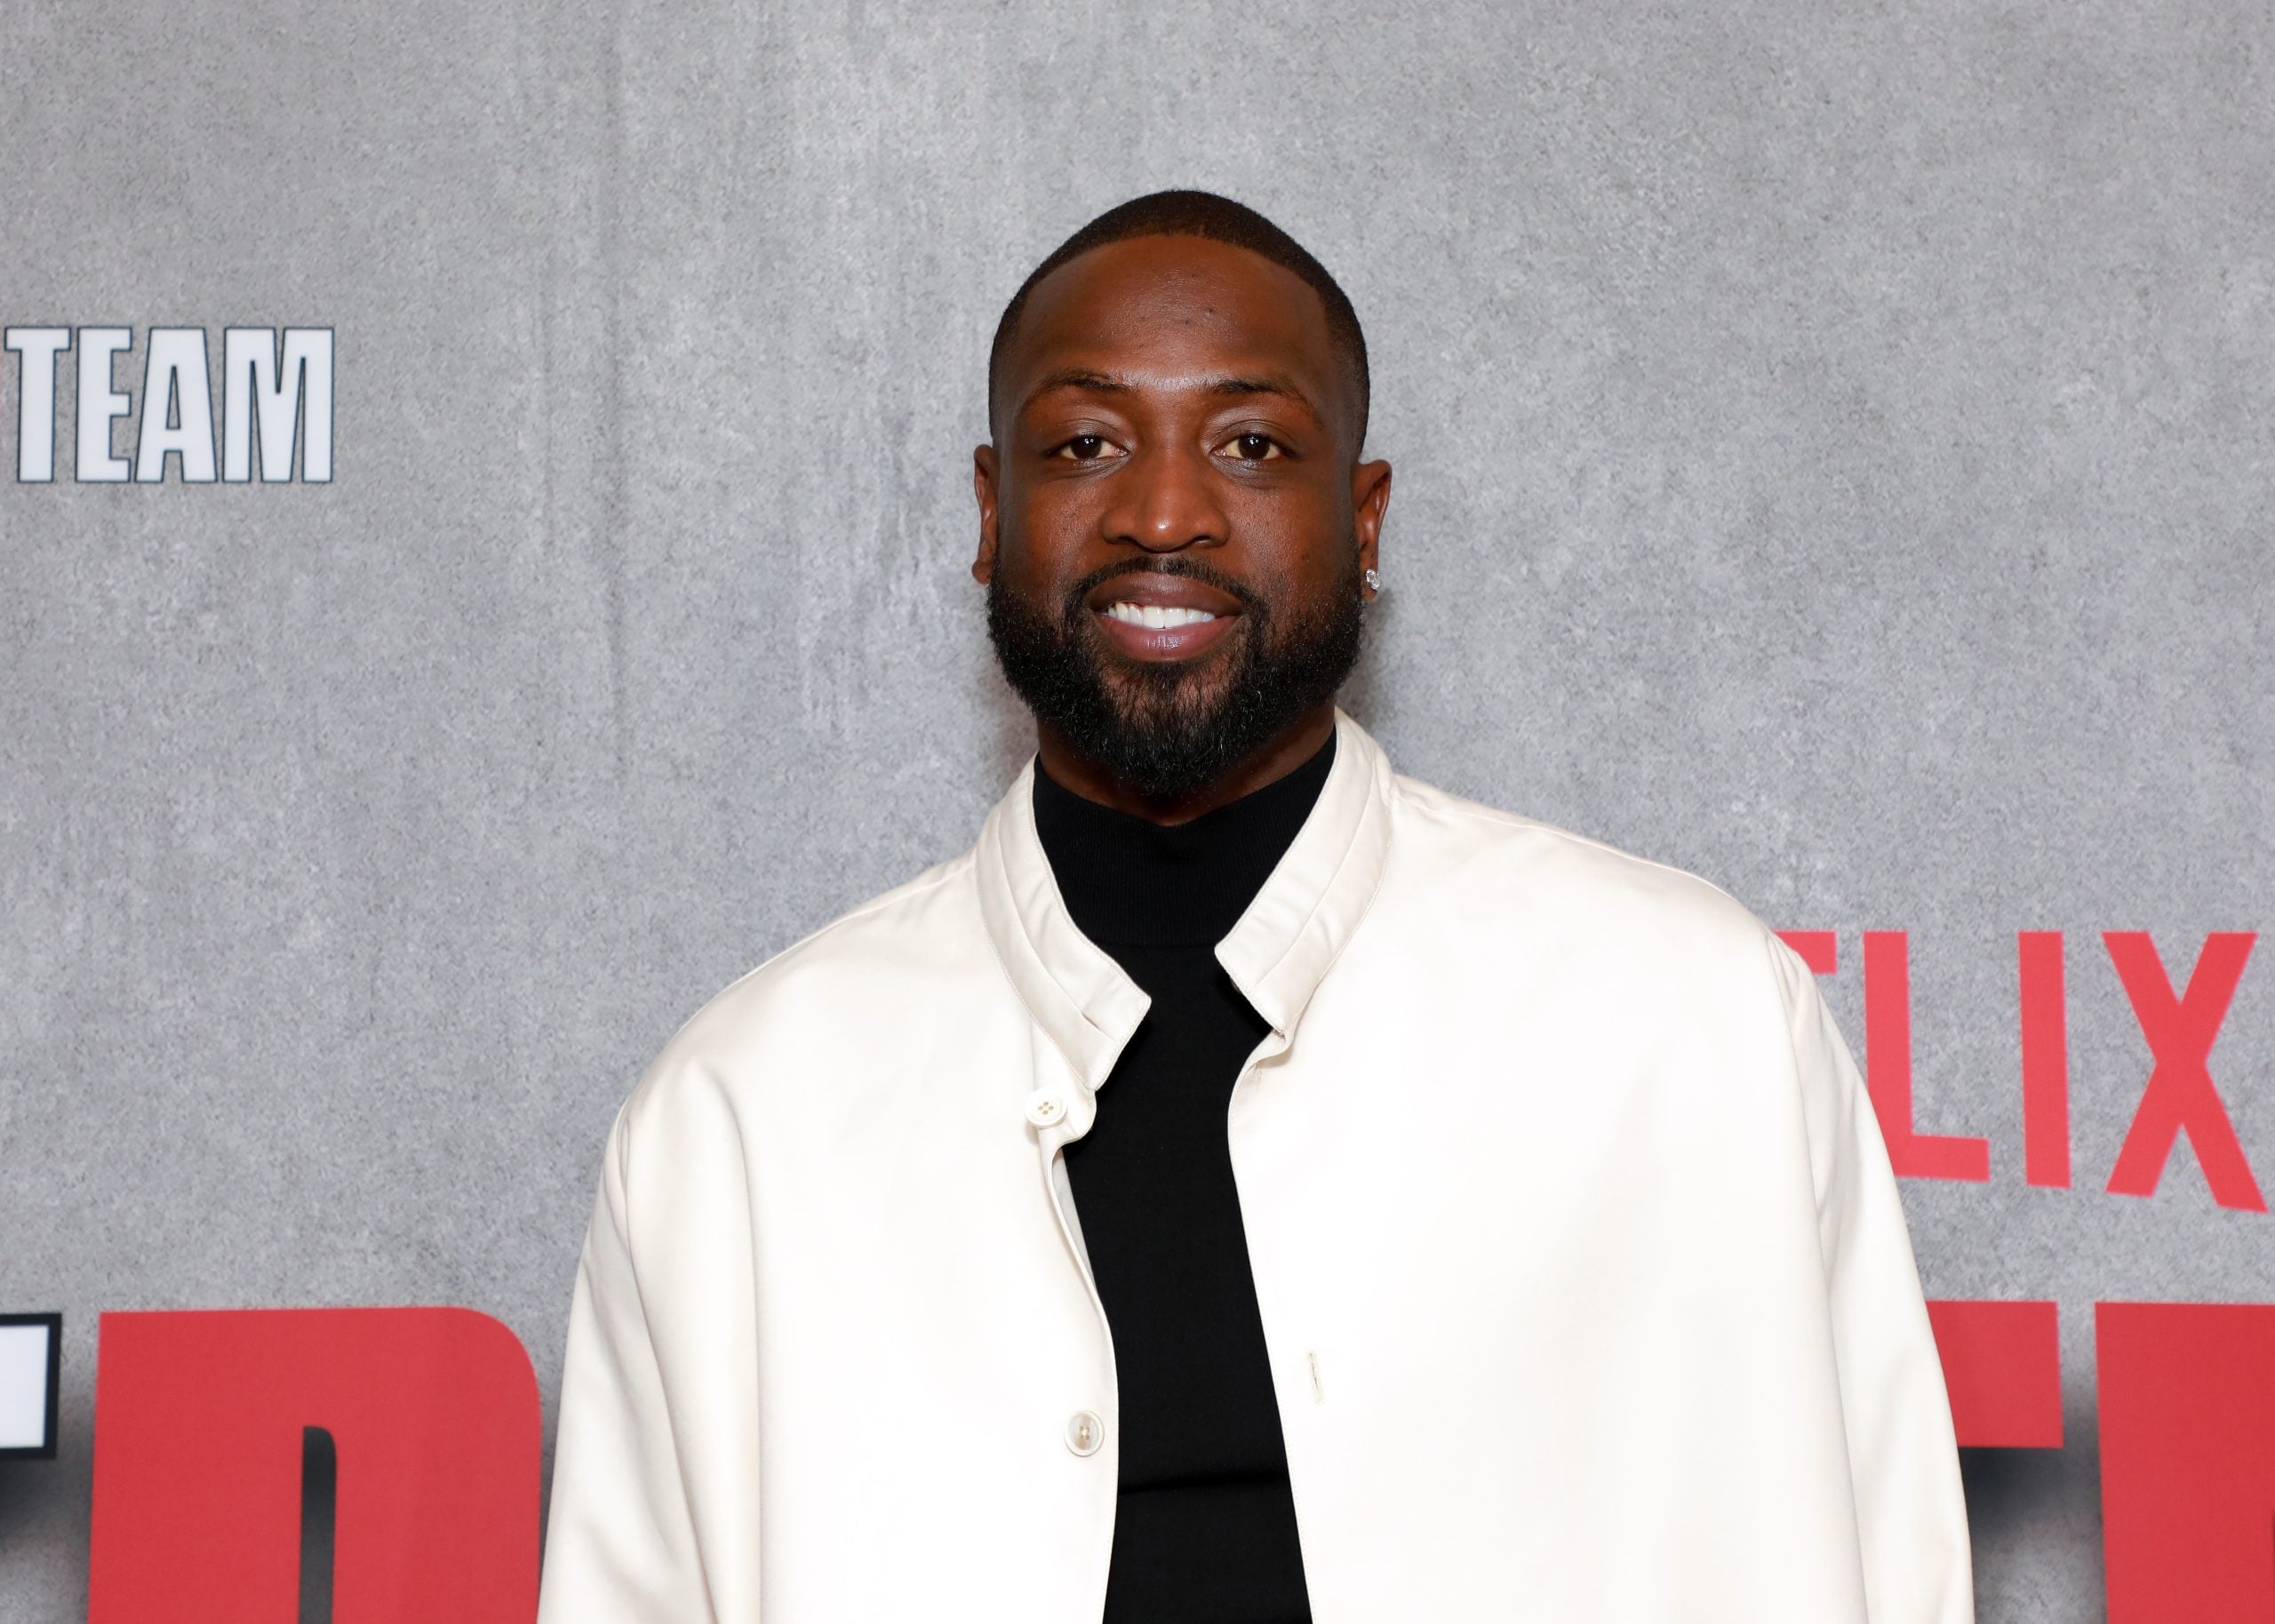 Dwyane Wade Responds To Ex-Wife’s Objection To Zaya’s Name And Gender Change